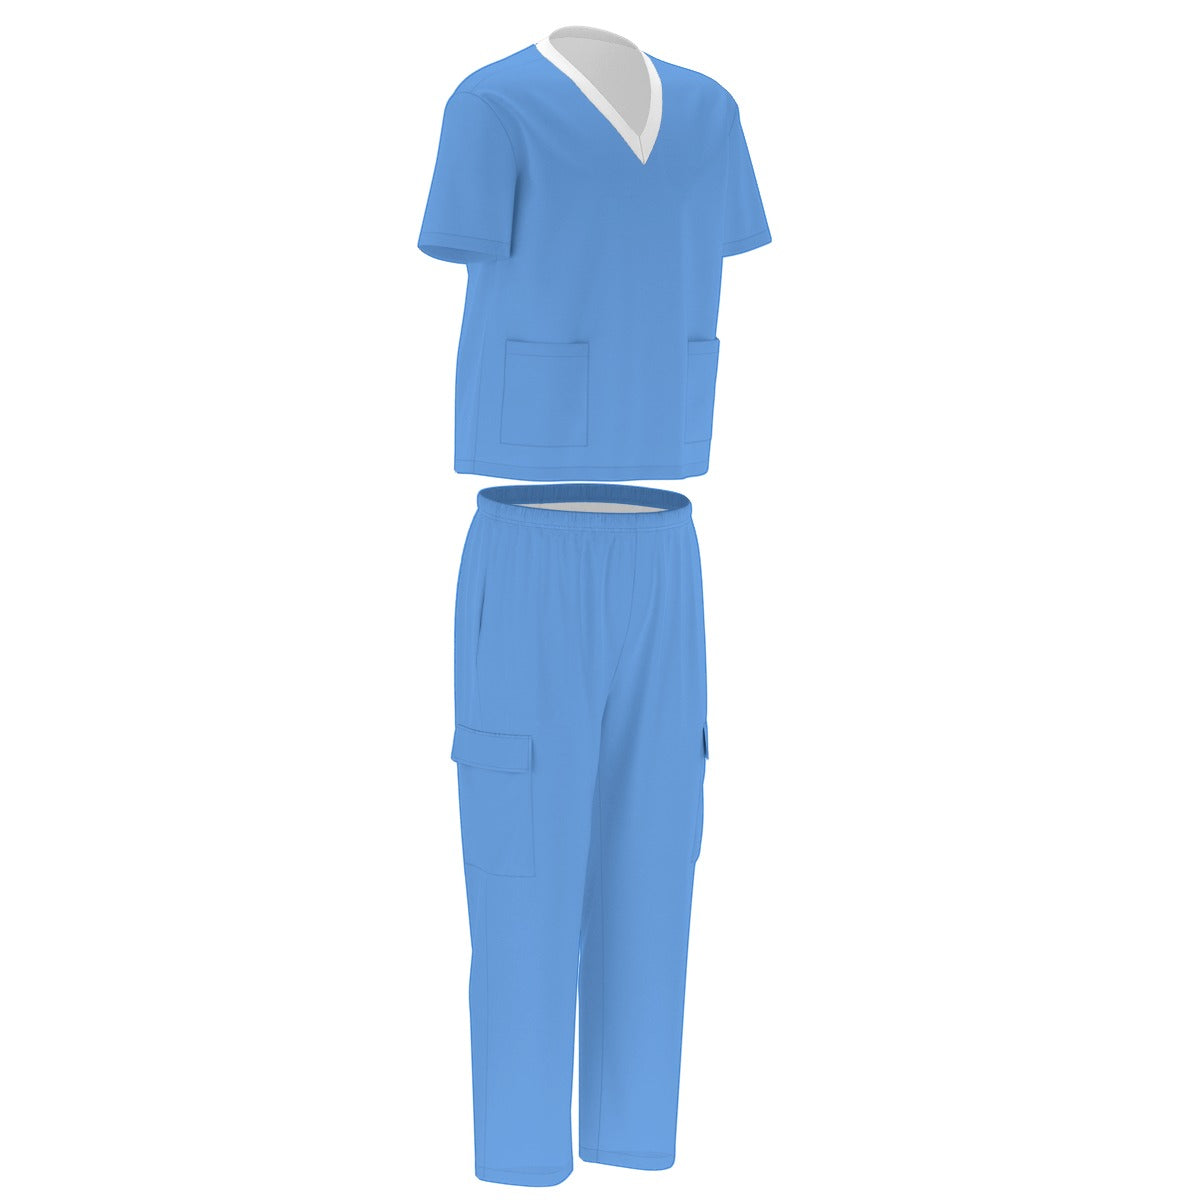 All-Over Print Unisex Scrub Set With Six Pockets